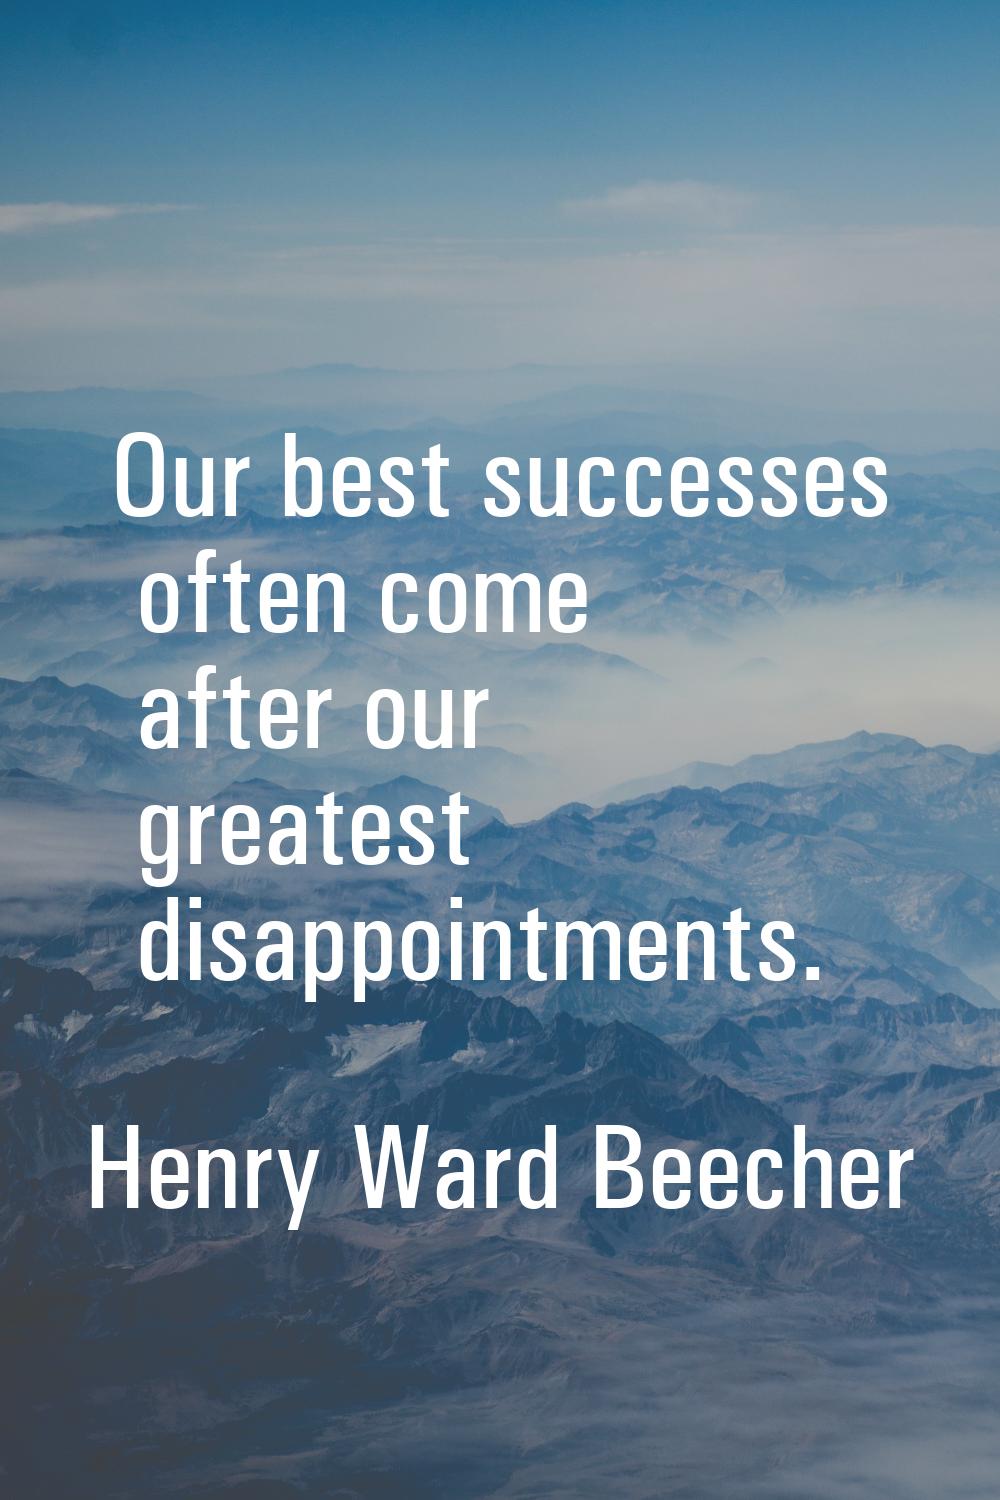 Our best successes often come after our greatest disappointments.